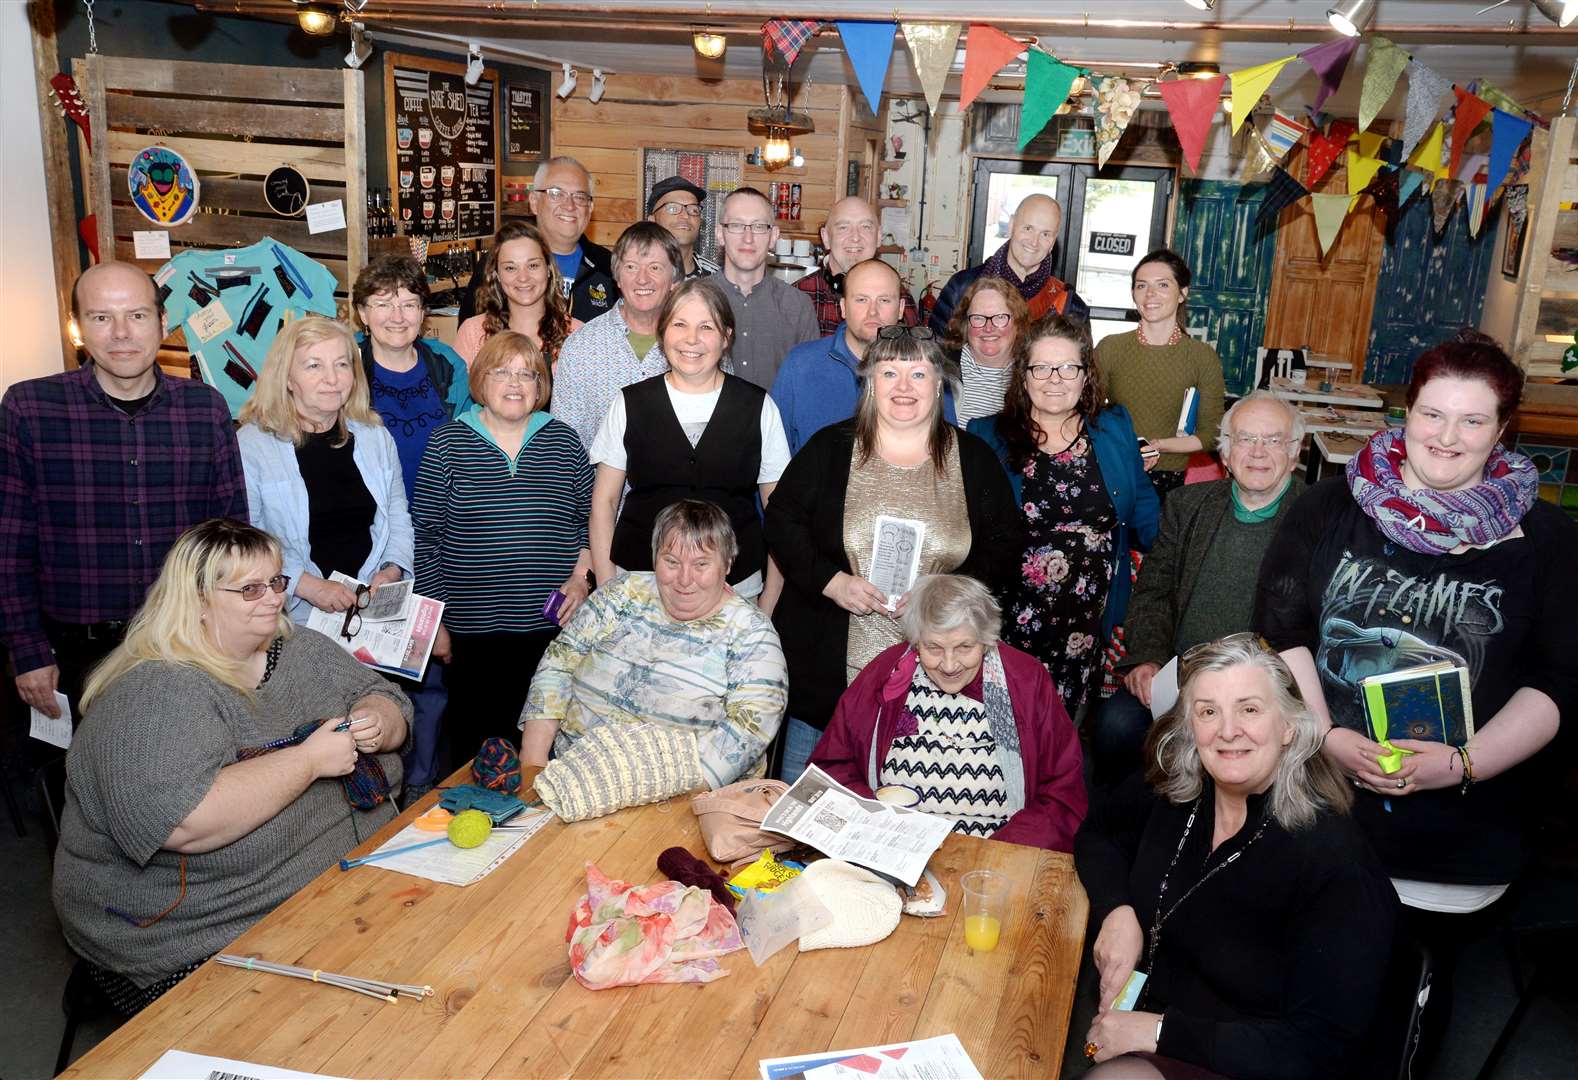 Organisers and participants at the launch of the Scottish Mental Health Arts Festival Highland at the Bike Shed in Merkinch, Inverness...Picture: Gair Fraser. Image No. 043864.